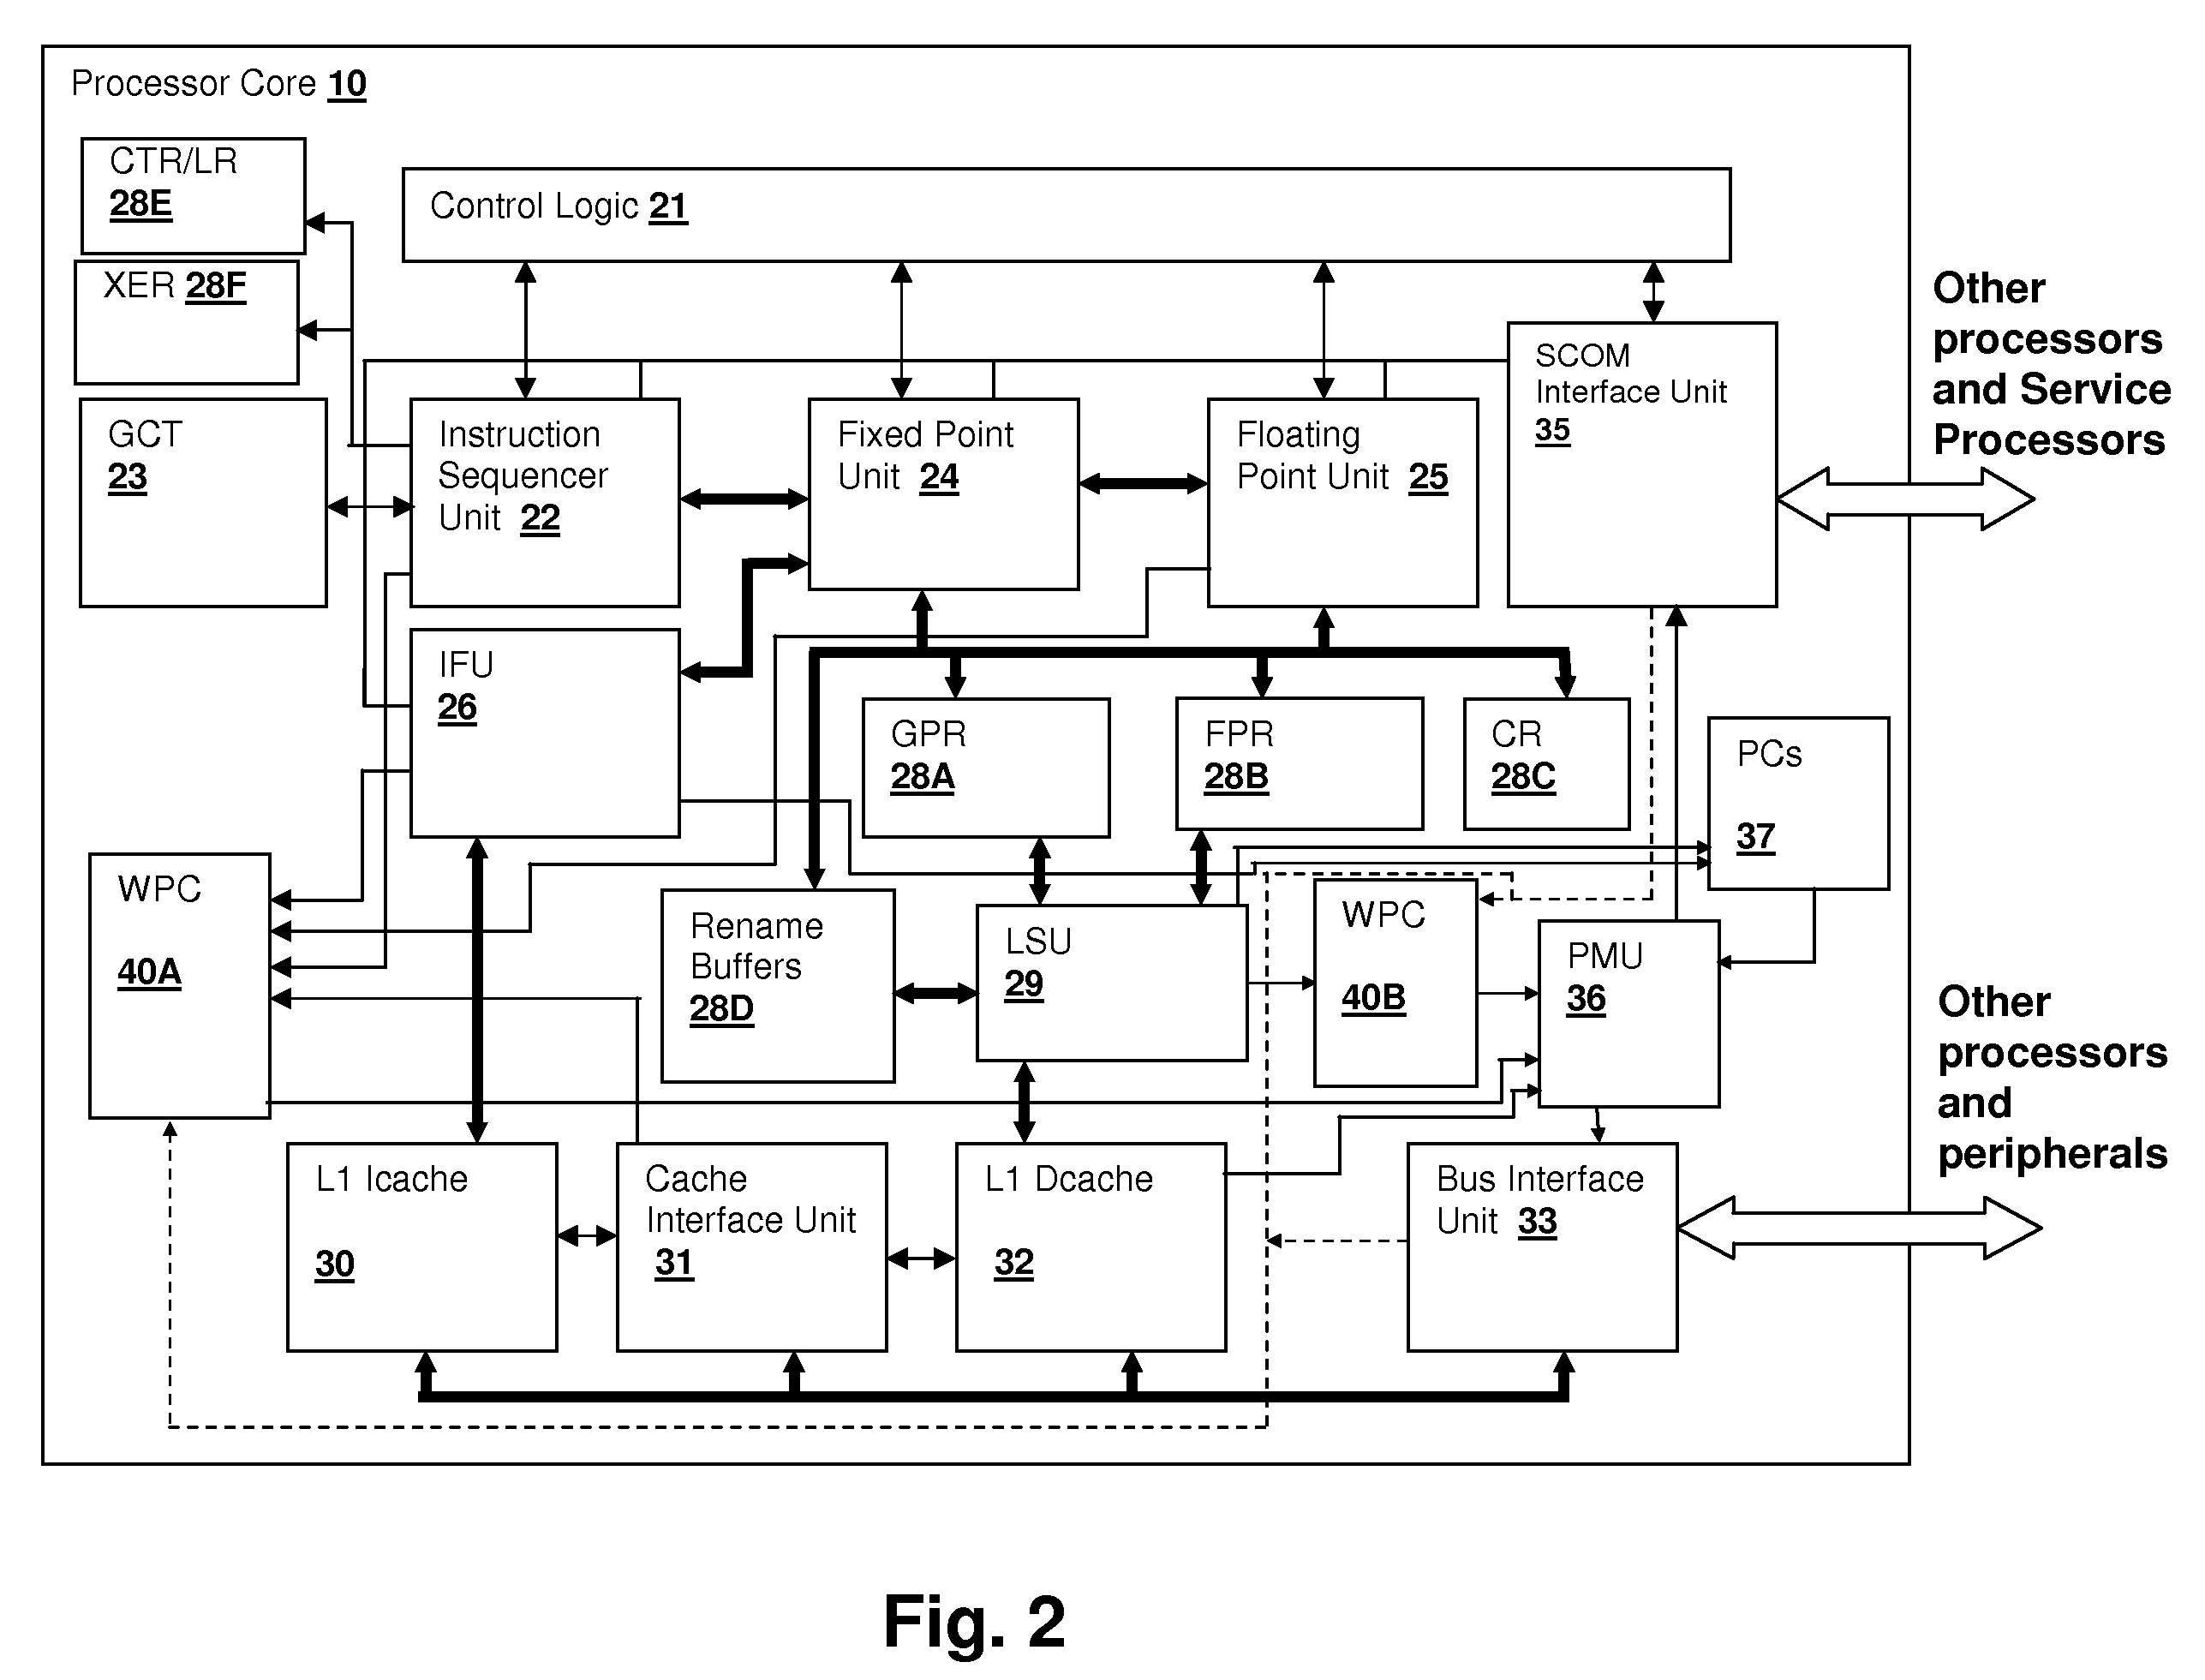 Weighted event counting system and method for processor performance measurements